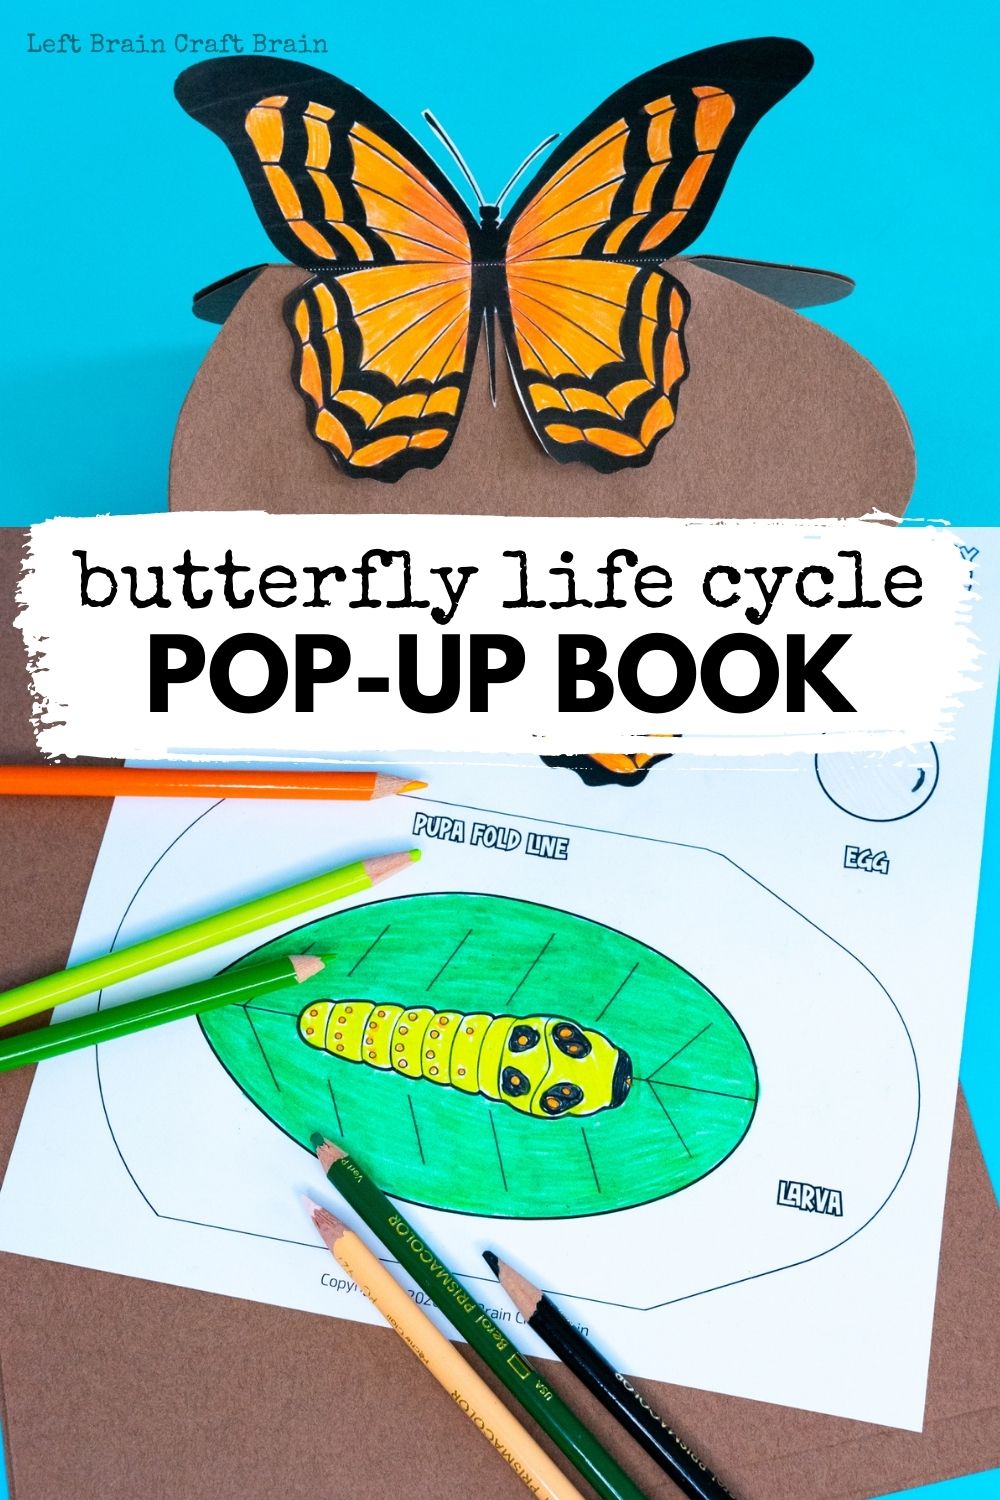 Learn about the butterfly life cycle with a fun pop-up book! It's a perfect STEAM activity for school or homeschool.